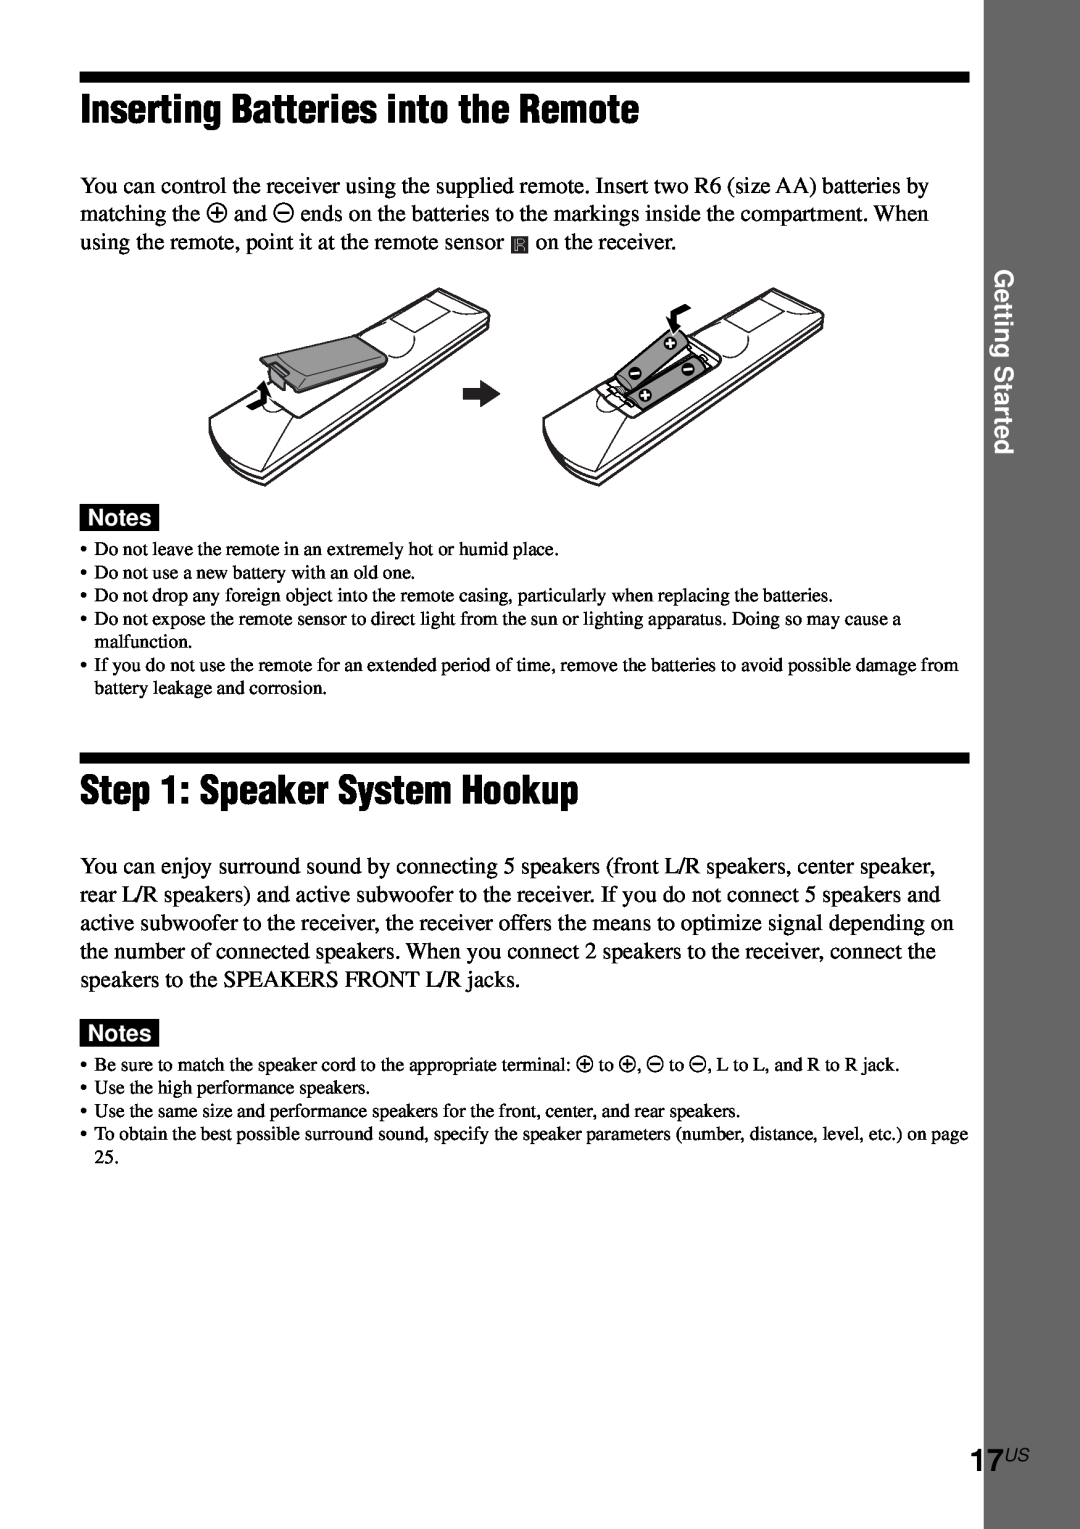 Sony AVD-S50ES operating instructions Inserting Batteries into the Remote, Speaker System Hookup, 17US, Getting Started 